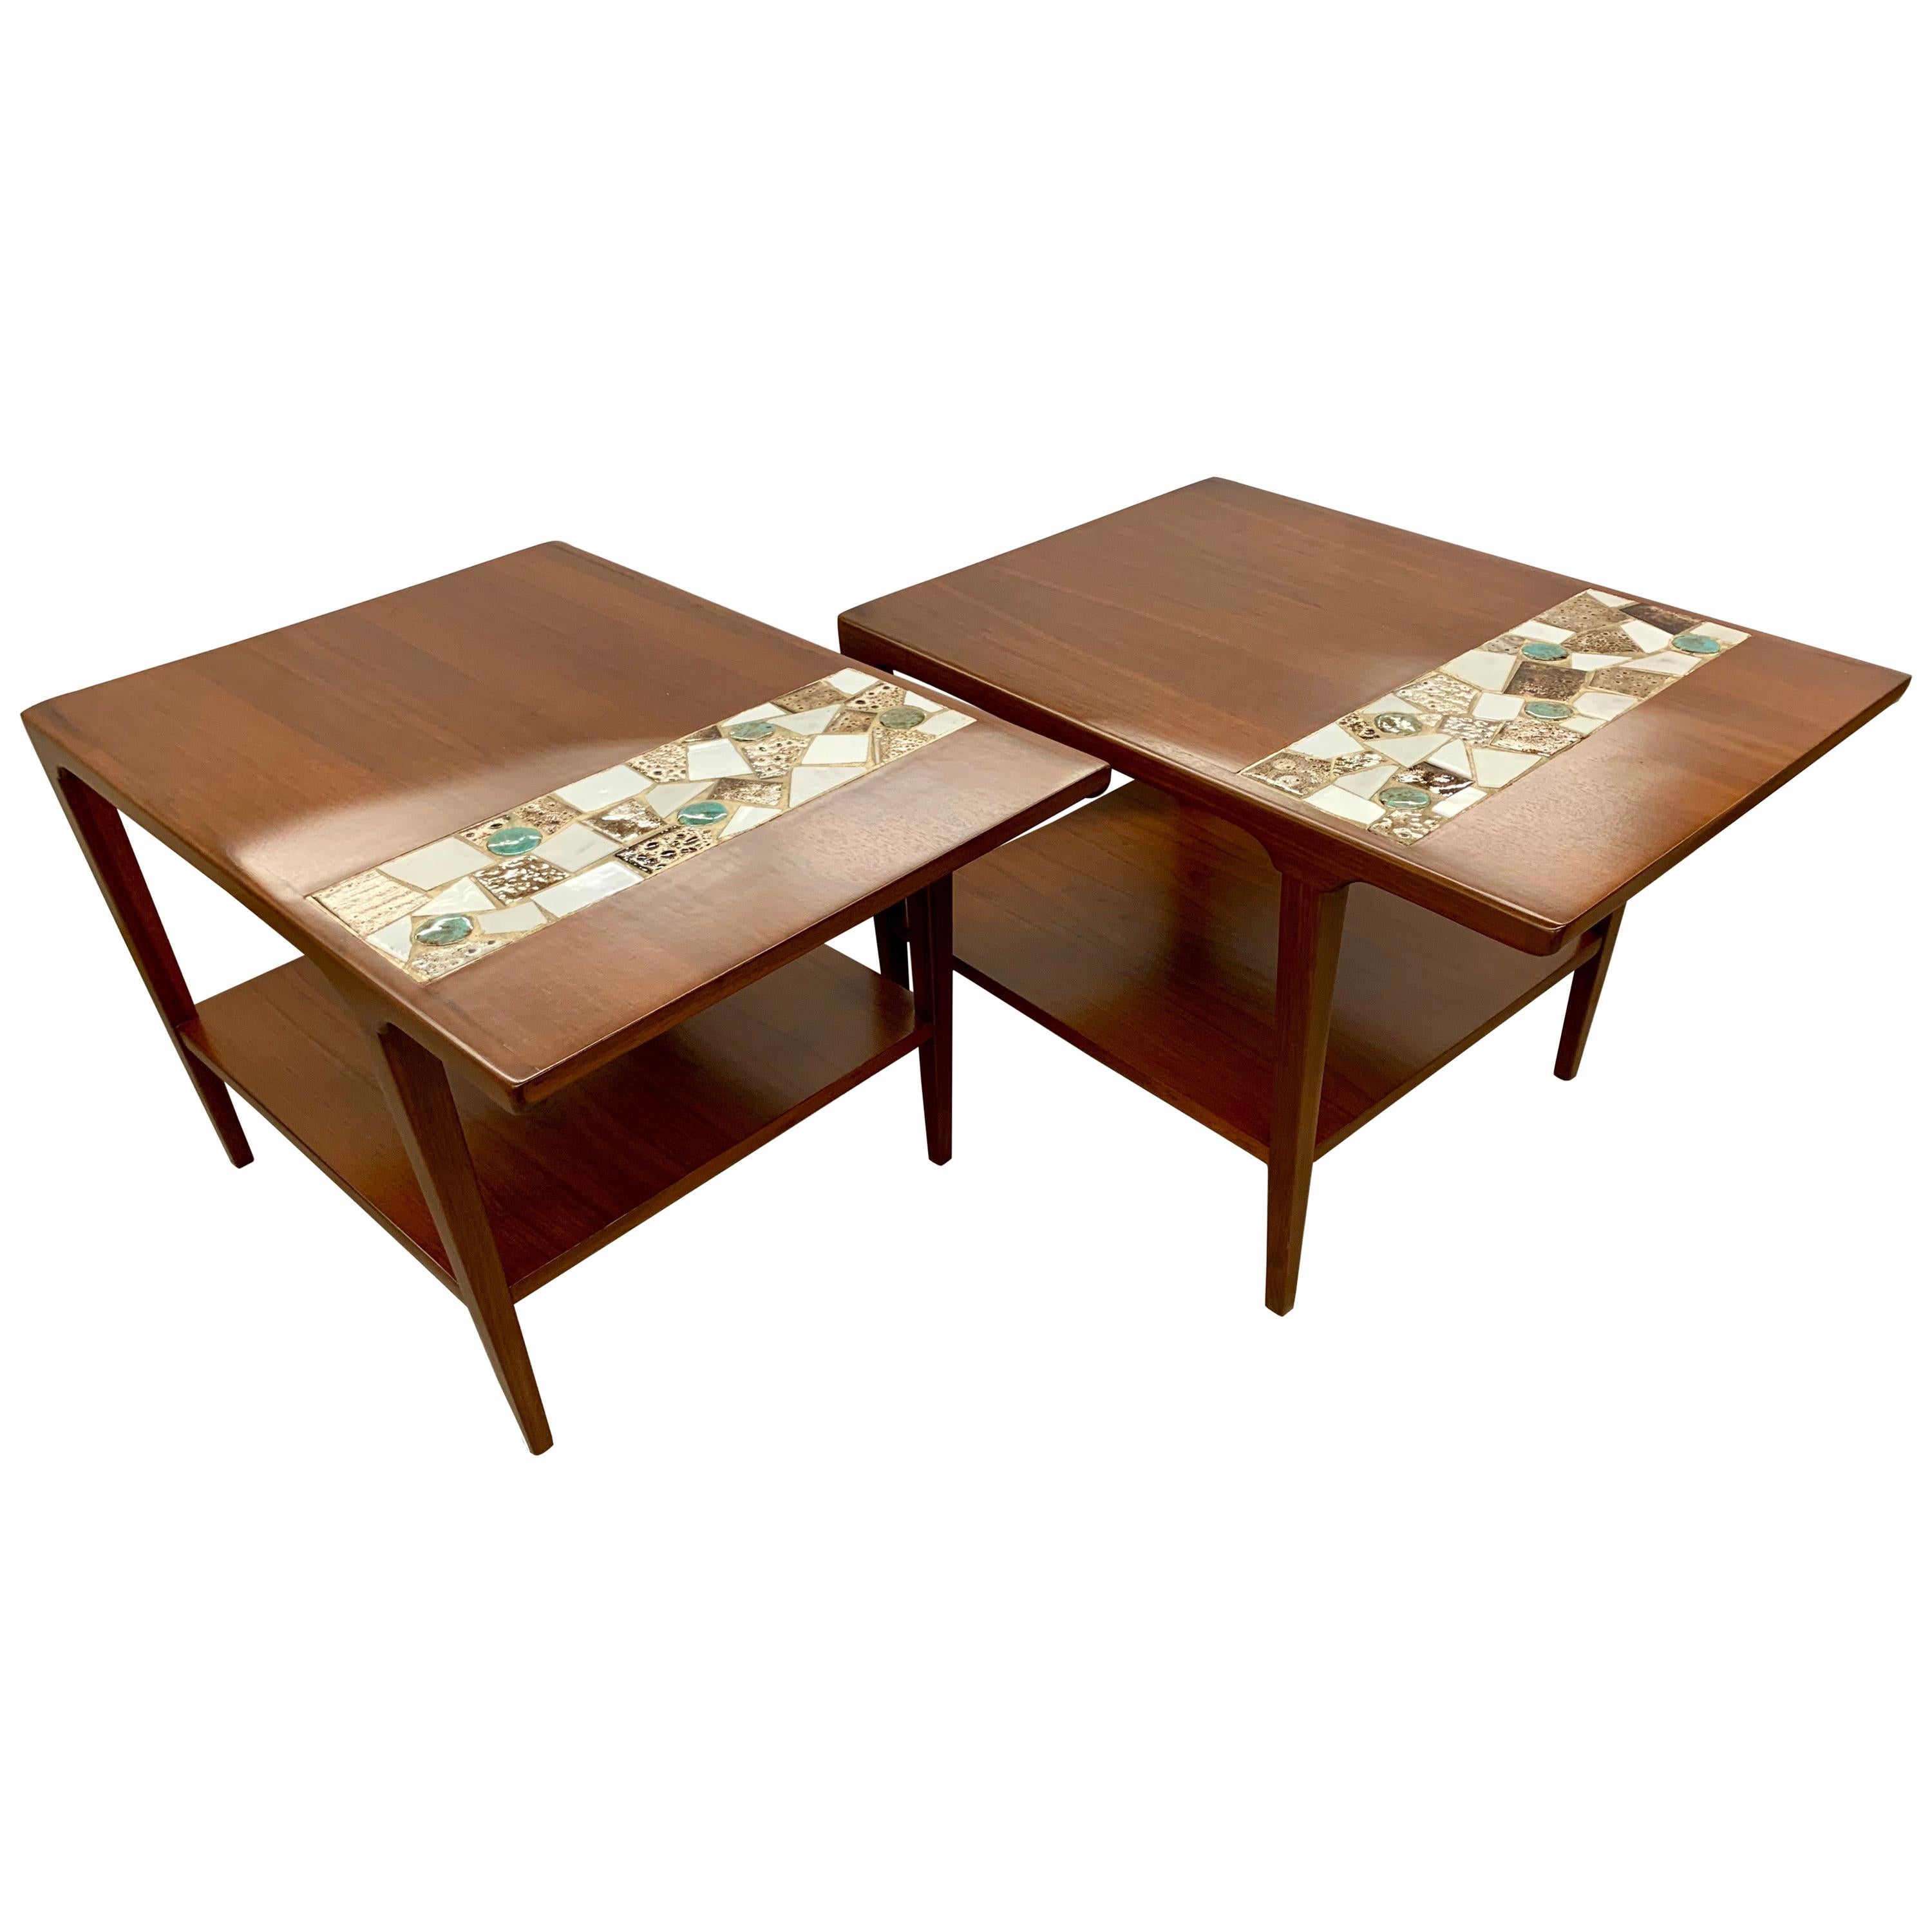 Pair of Mid-Century Modern Tile Top Walnut End Tables